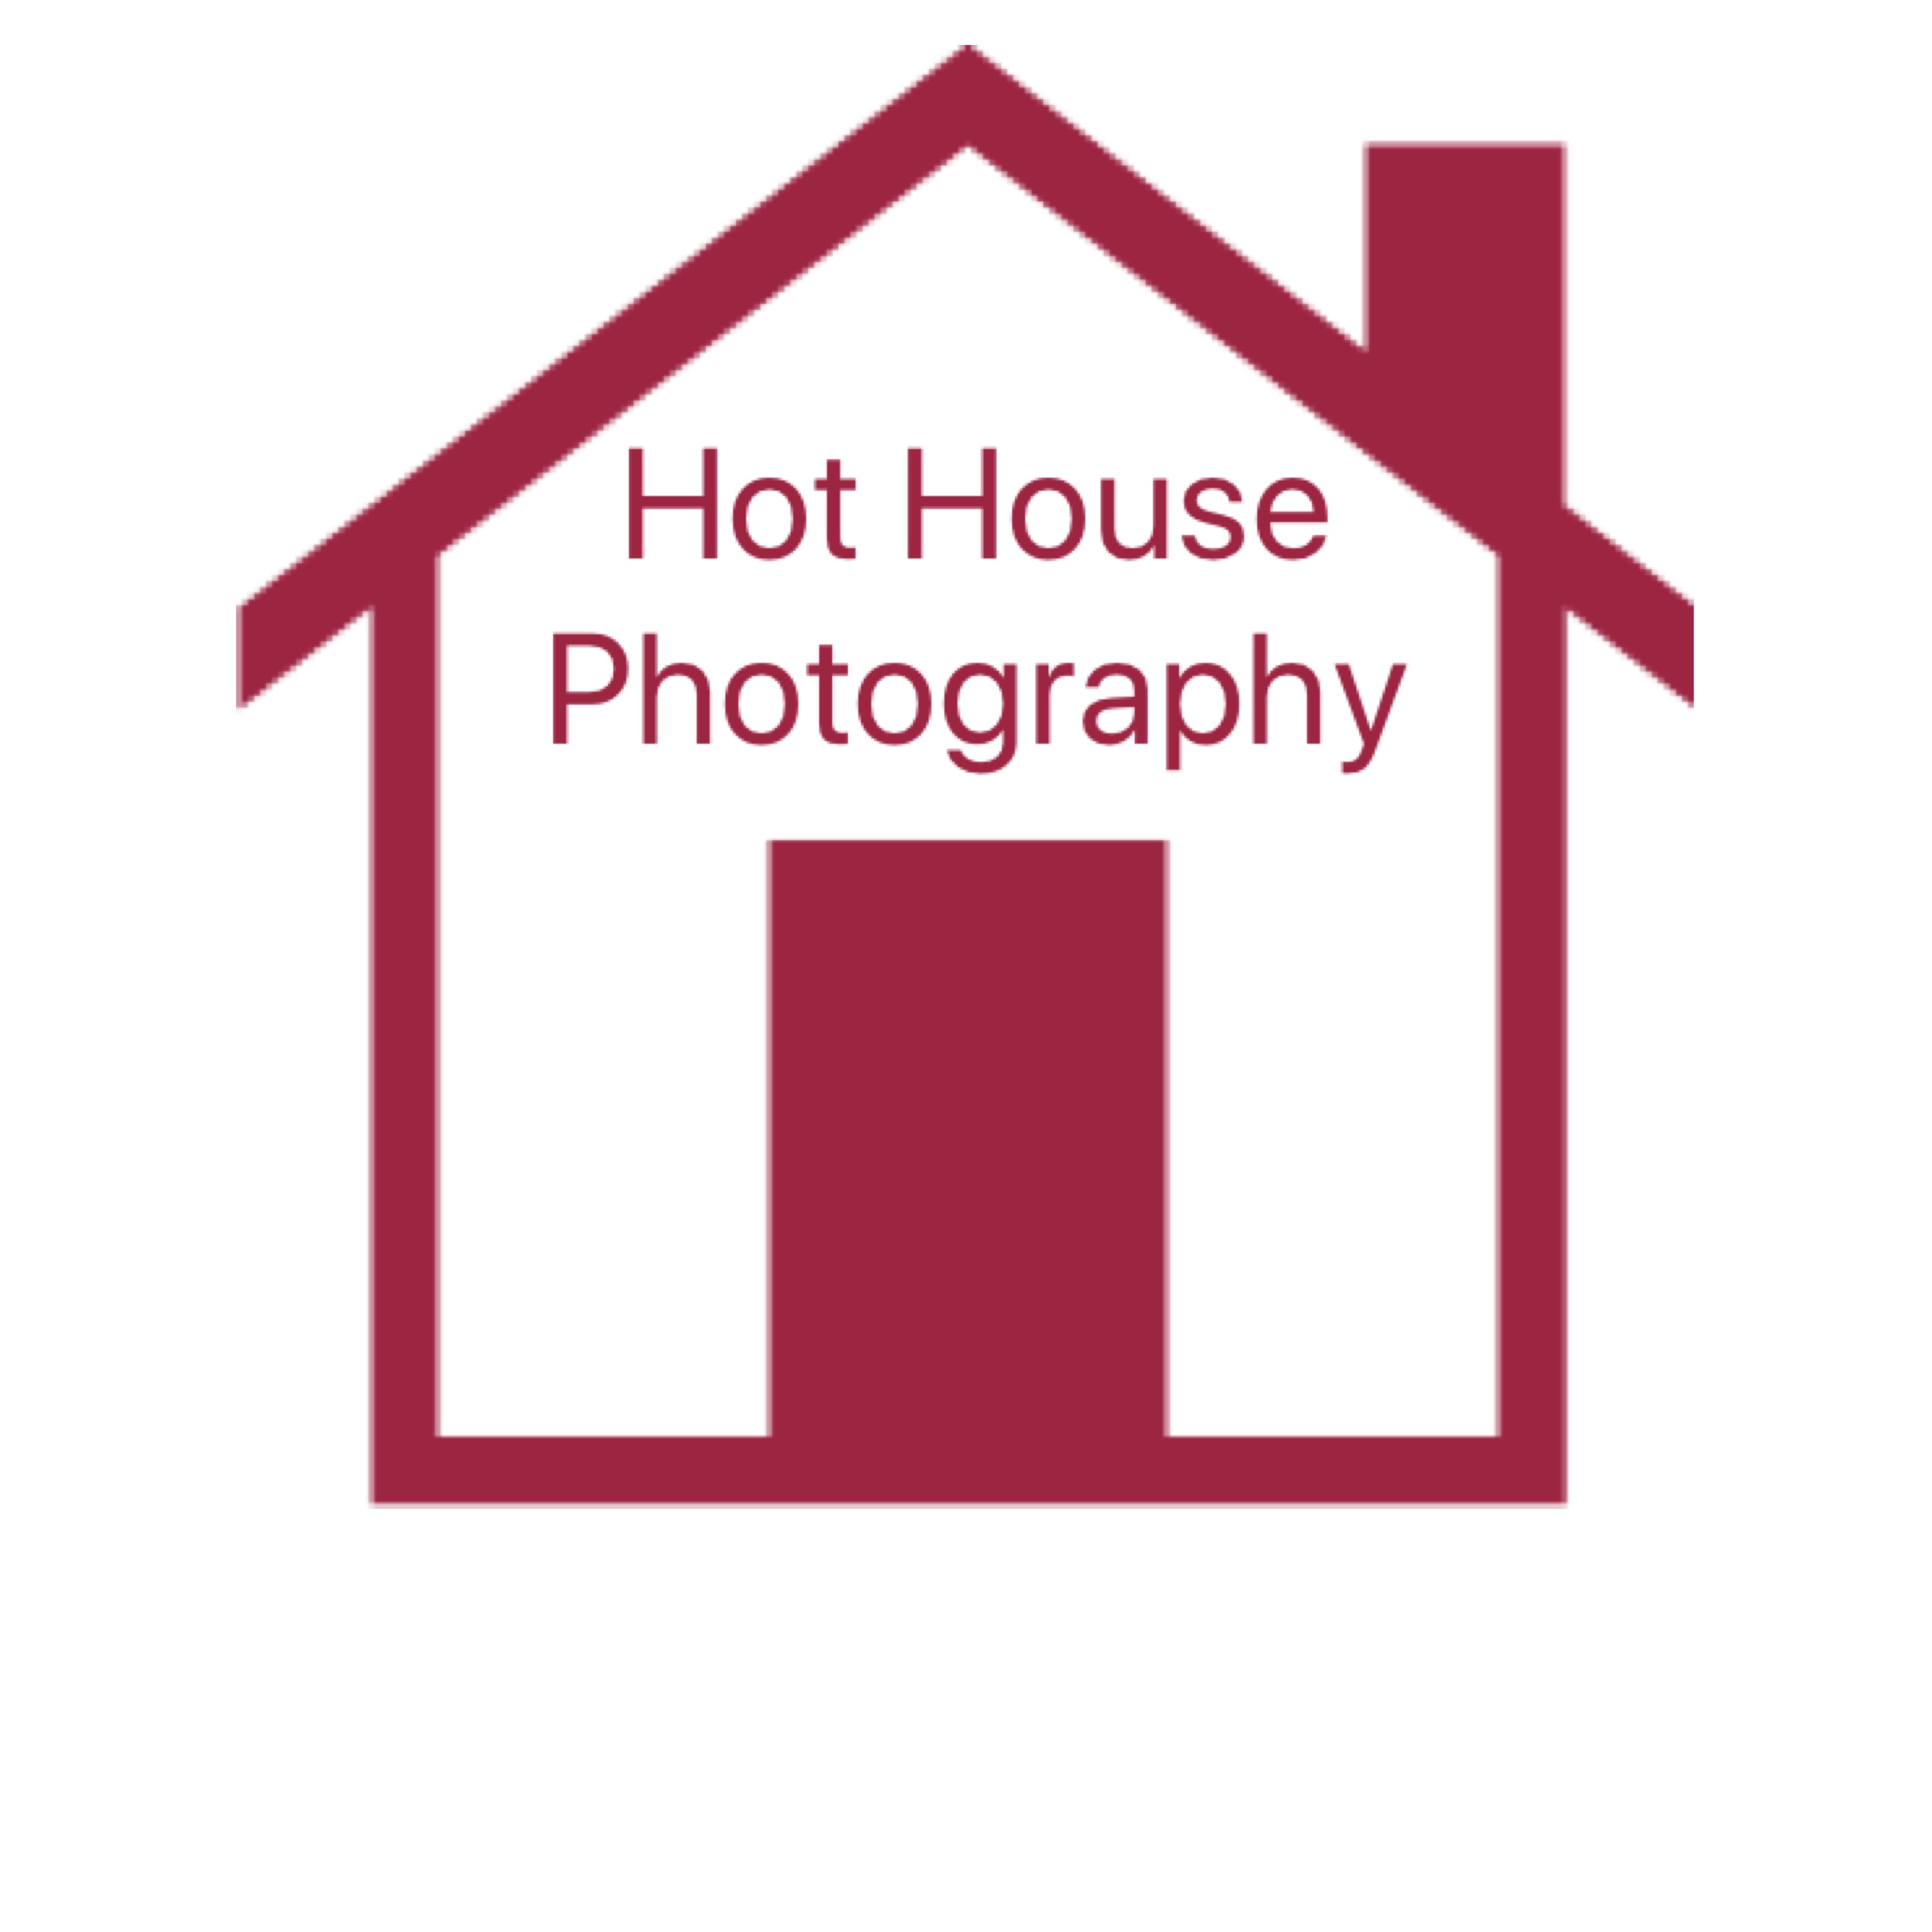 Hot House Photography